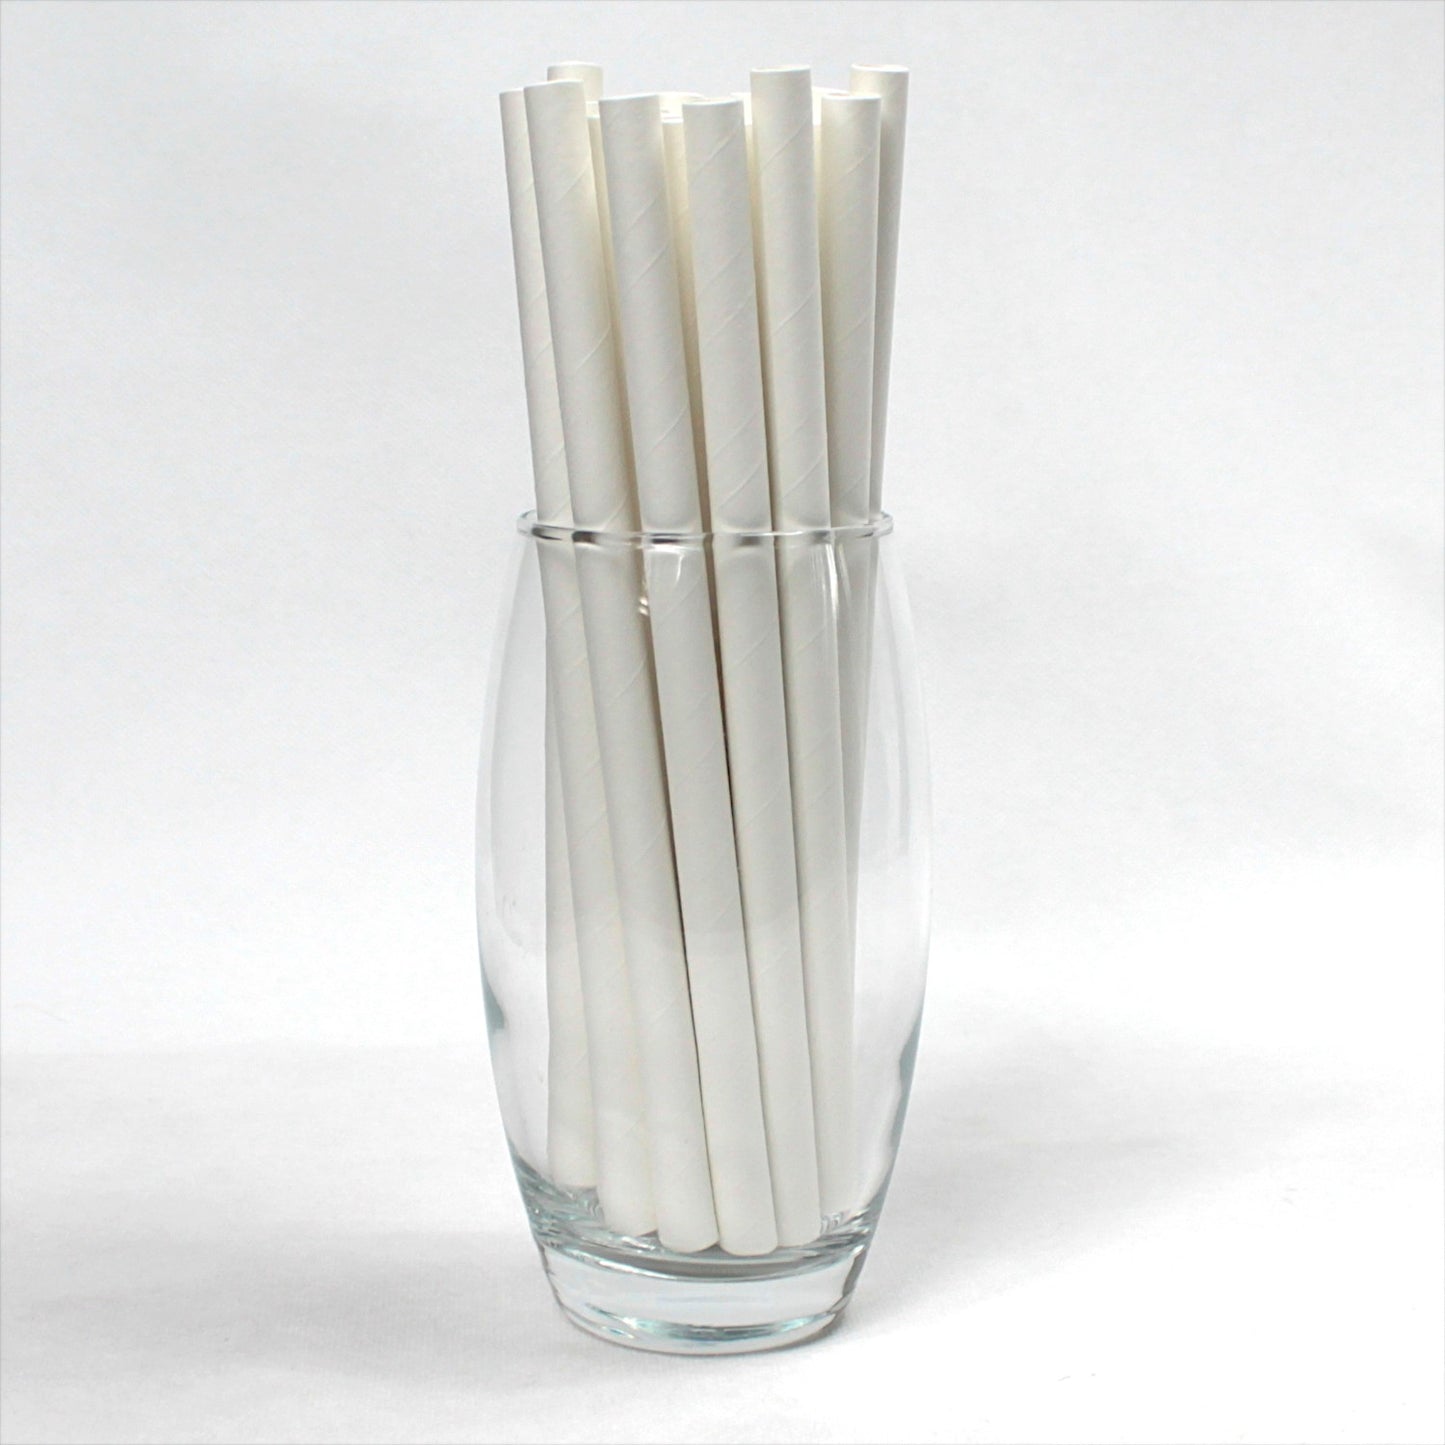 White Paper Straws (10mm x 200mm) - Quality Drinking Straws for Smoothies and Milkshakes - Intrinsic Paper Straws